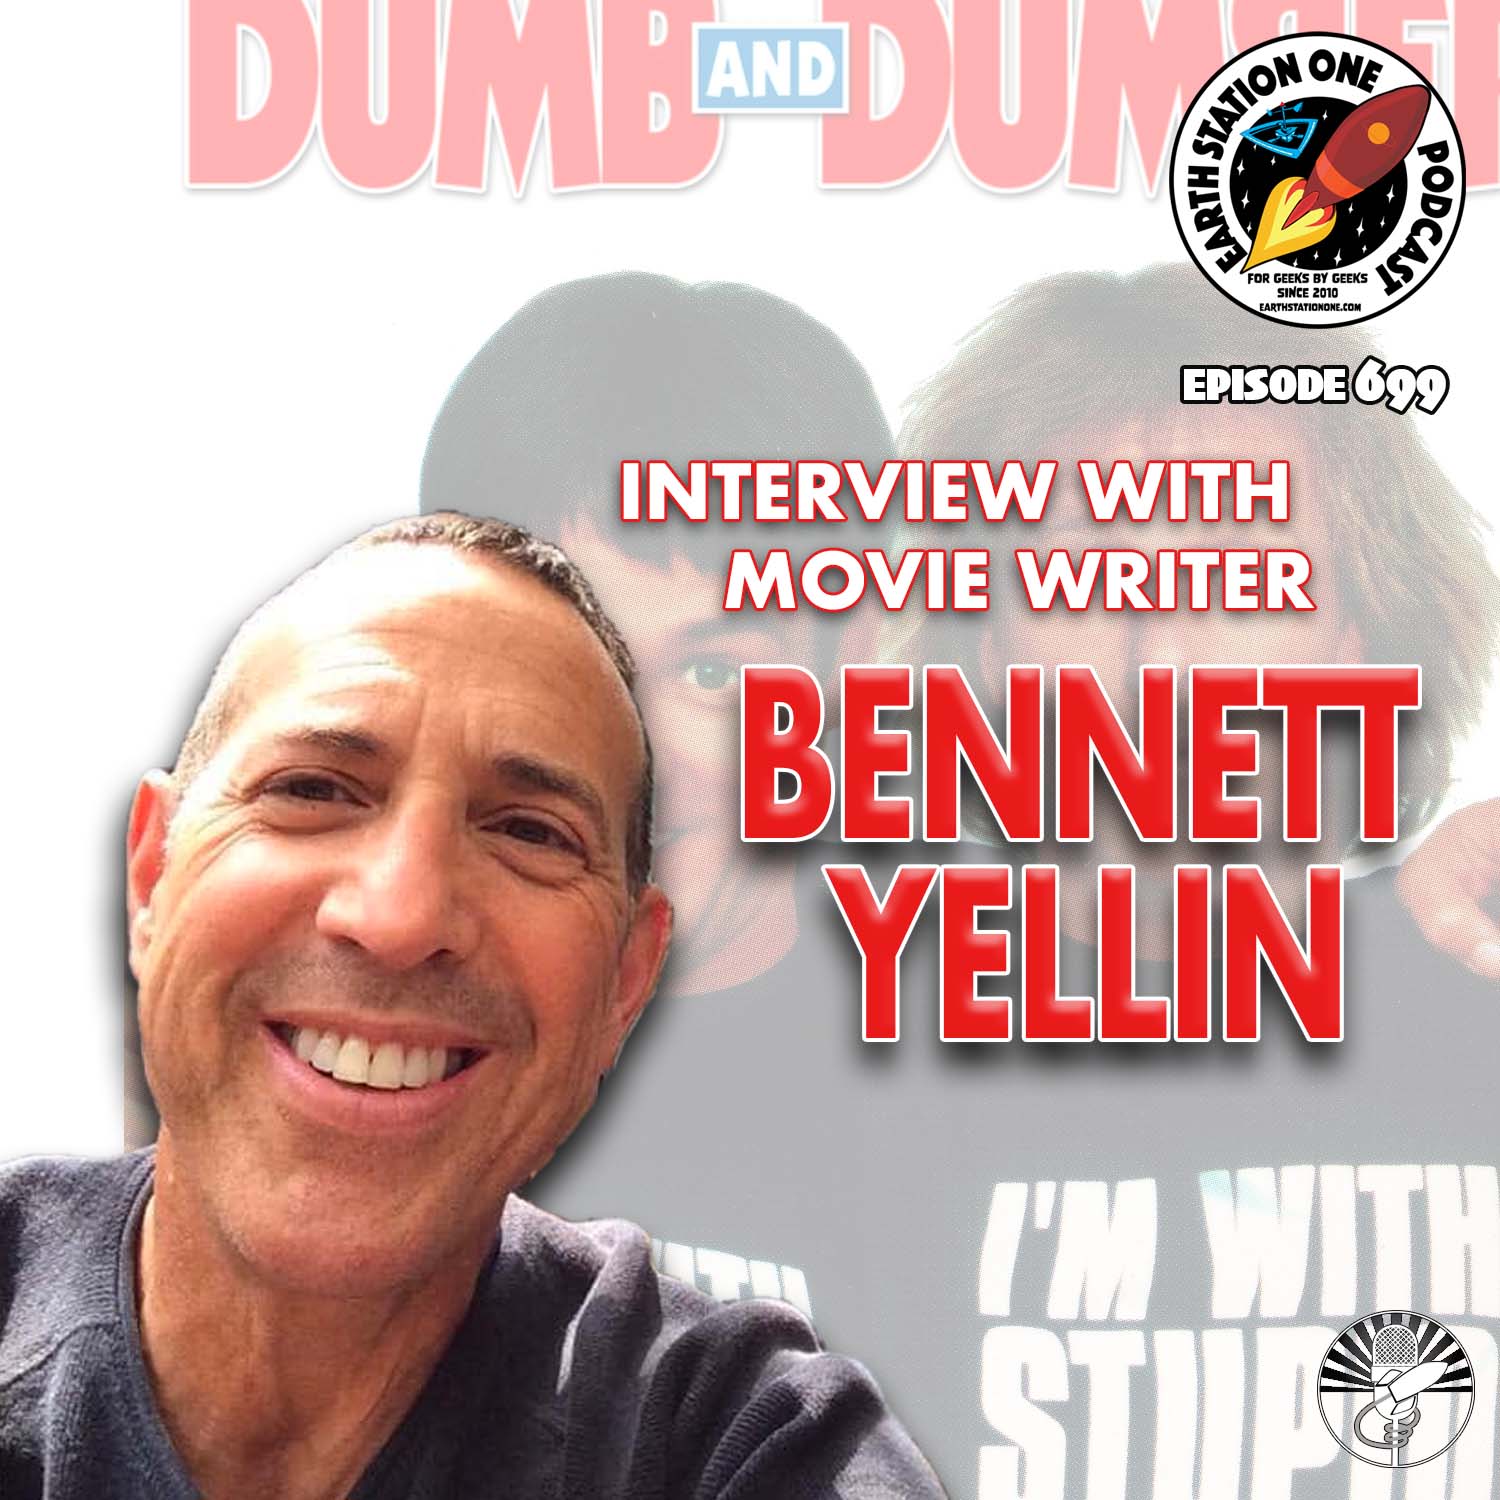 The Earth Station One Podcast Ep 699 - Interview with Bennett Yellin